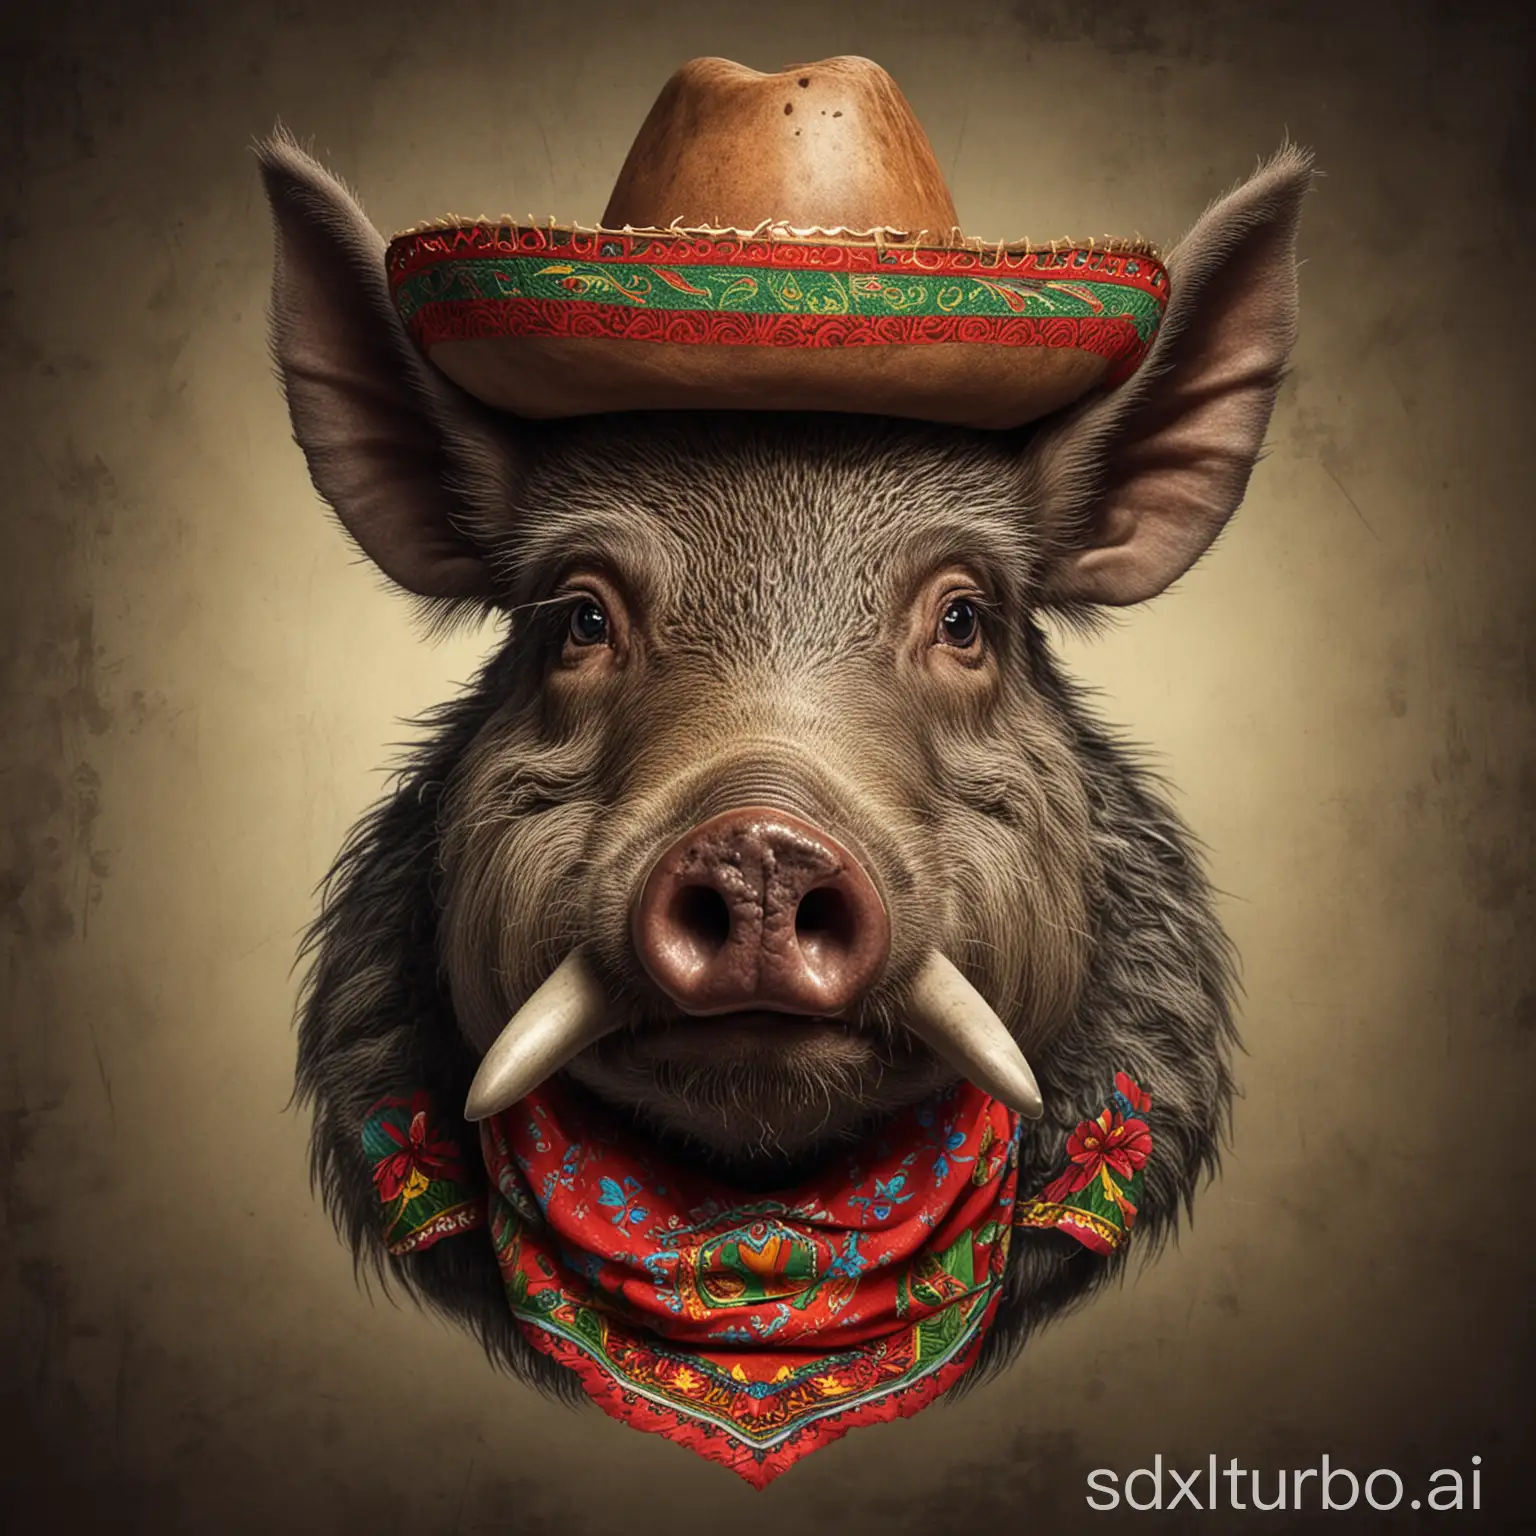 Wild-Boar-with-Big-Mexican-Mustache